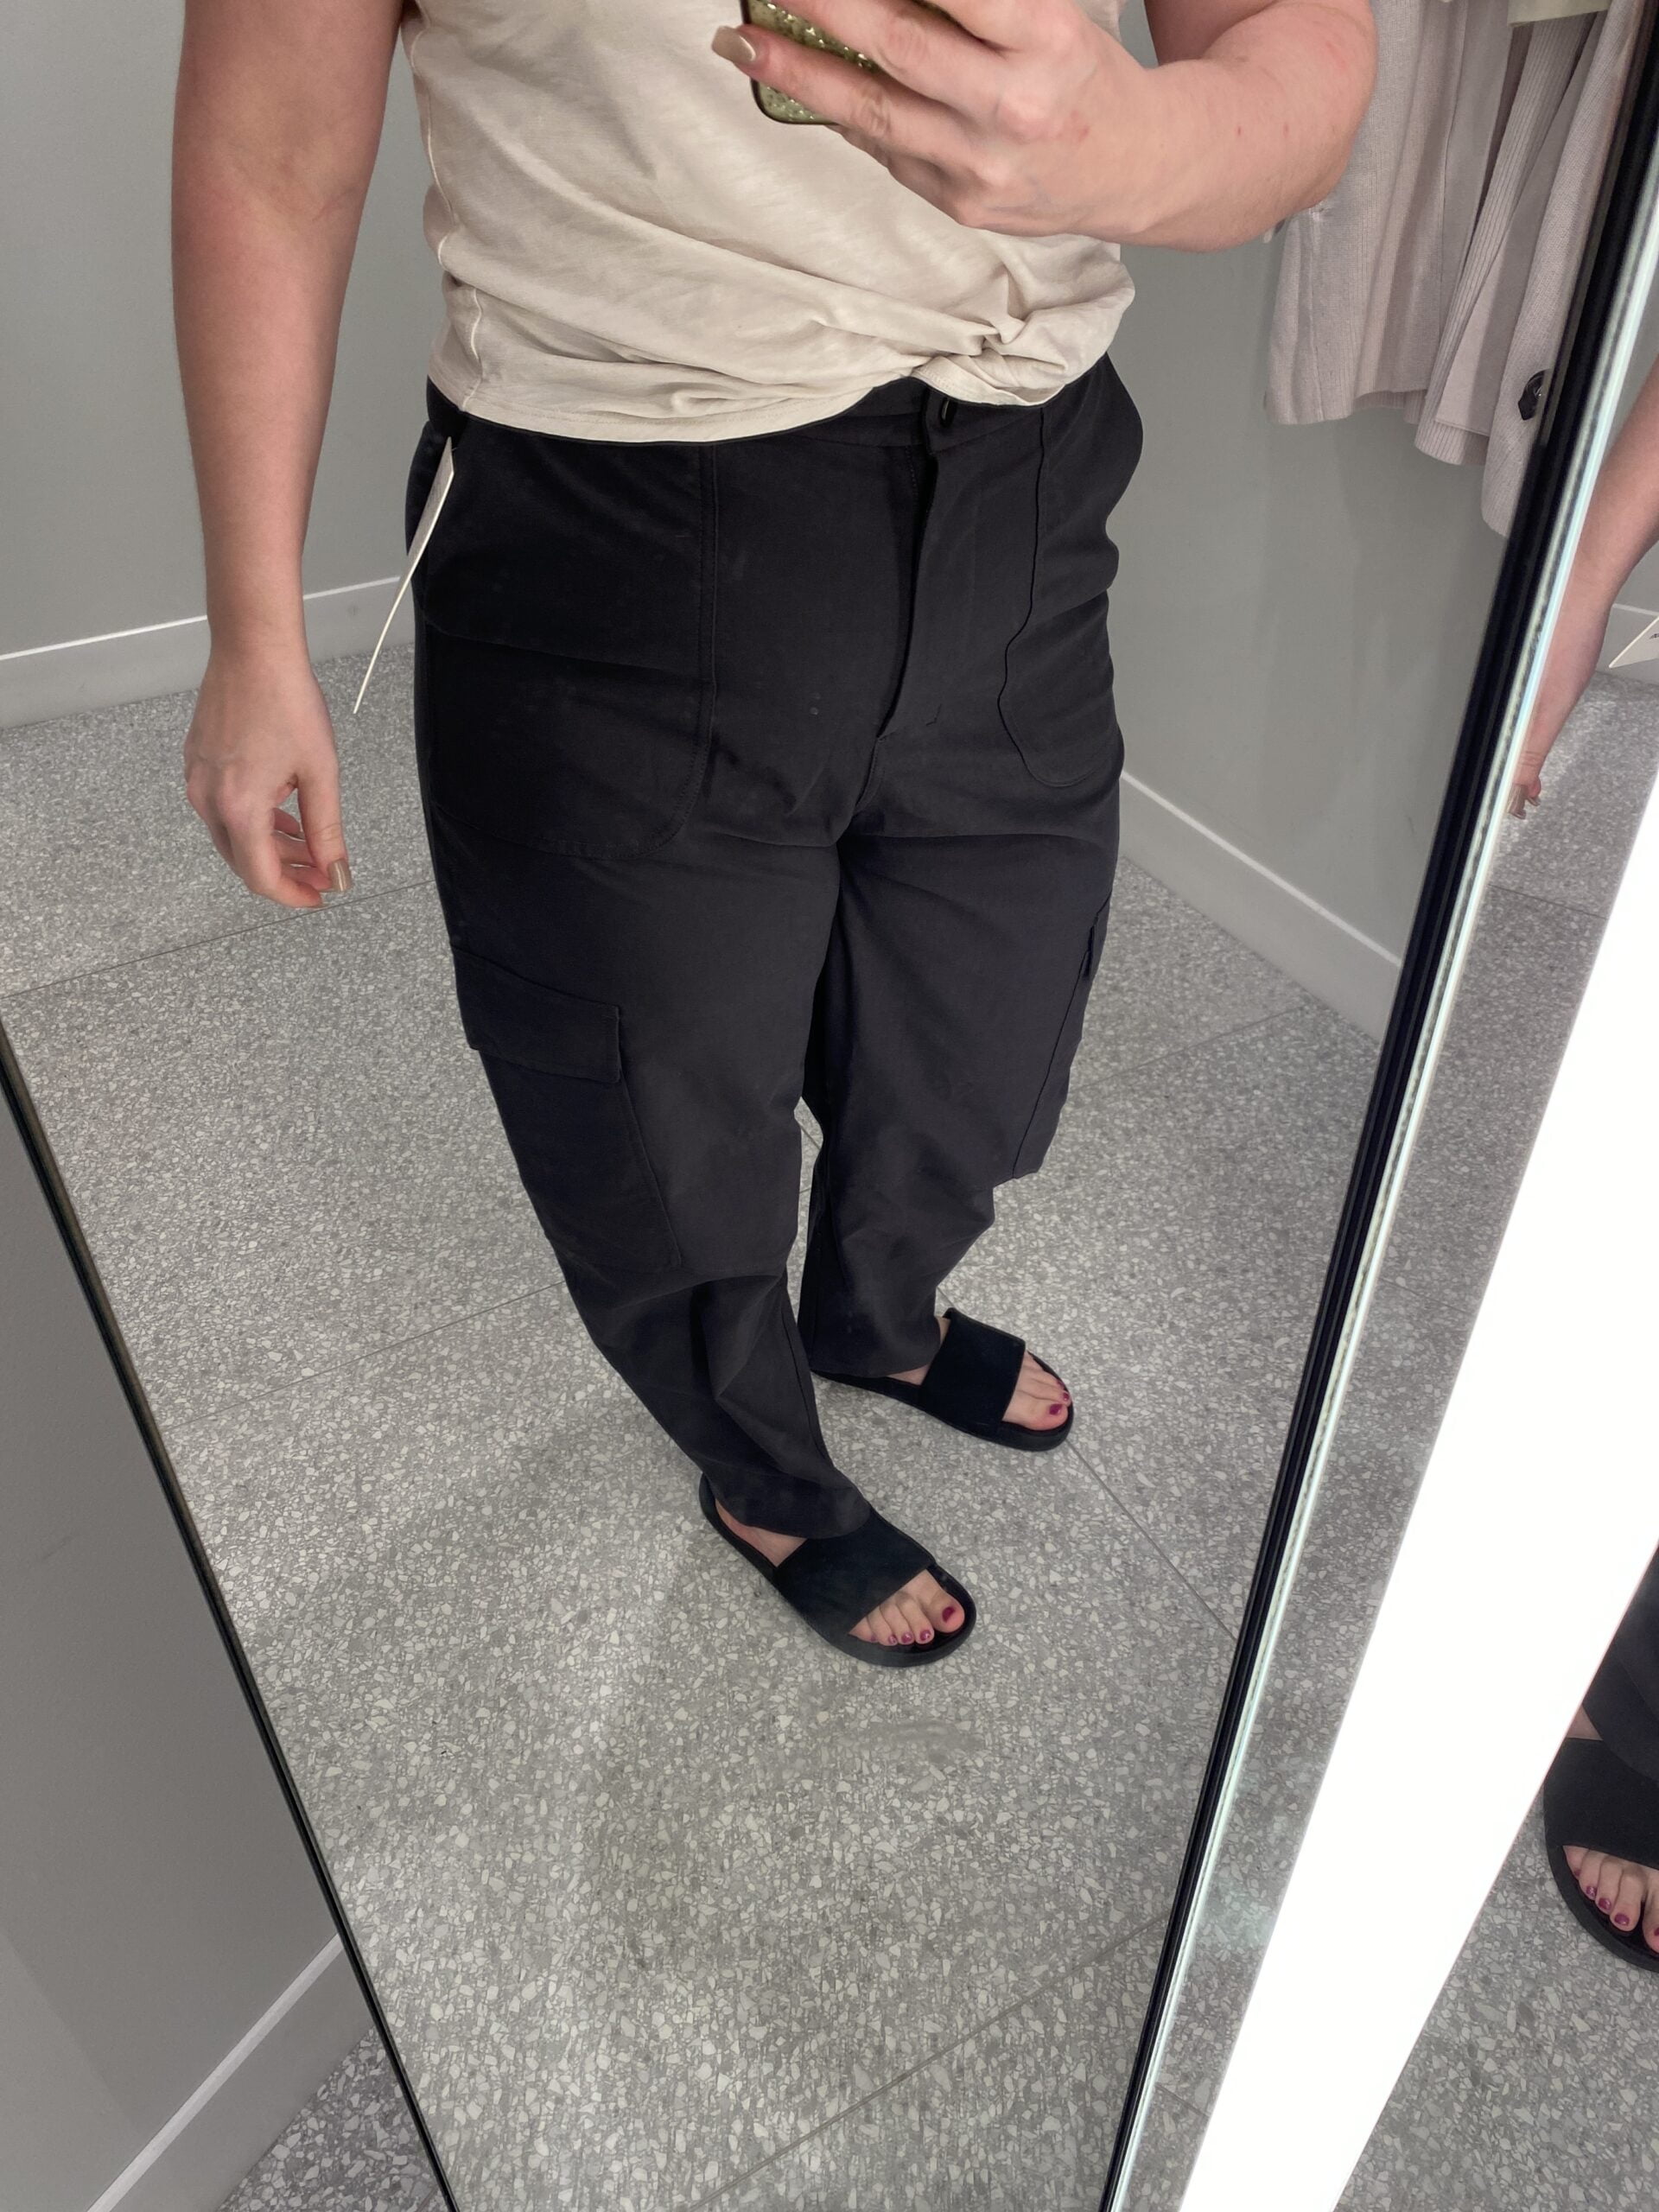 The utilitech cargo pants did not disappoint. Excuse the post